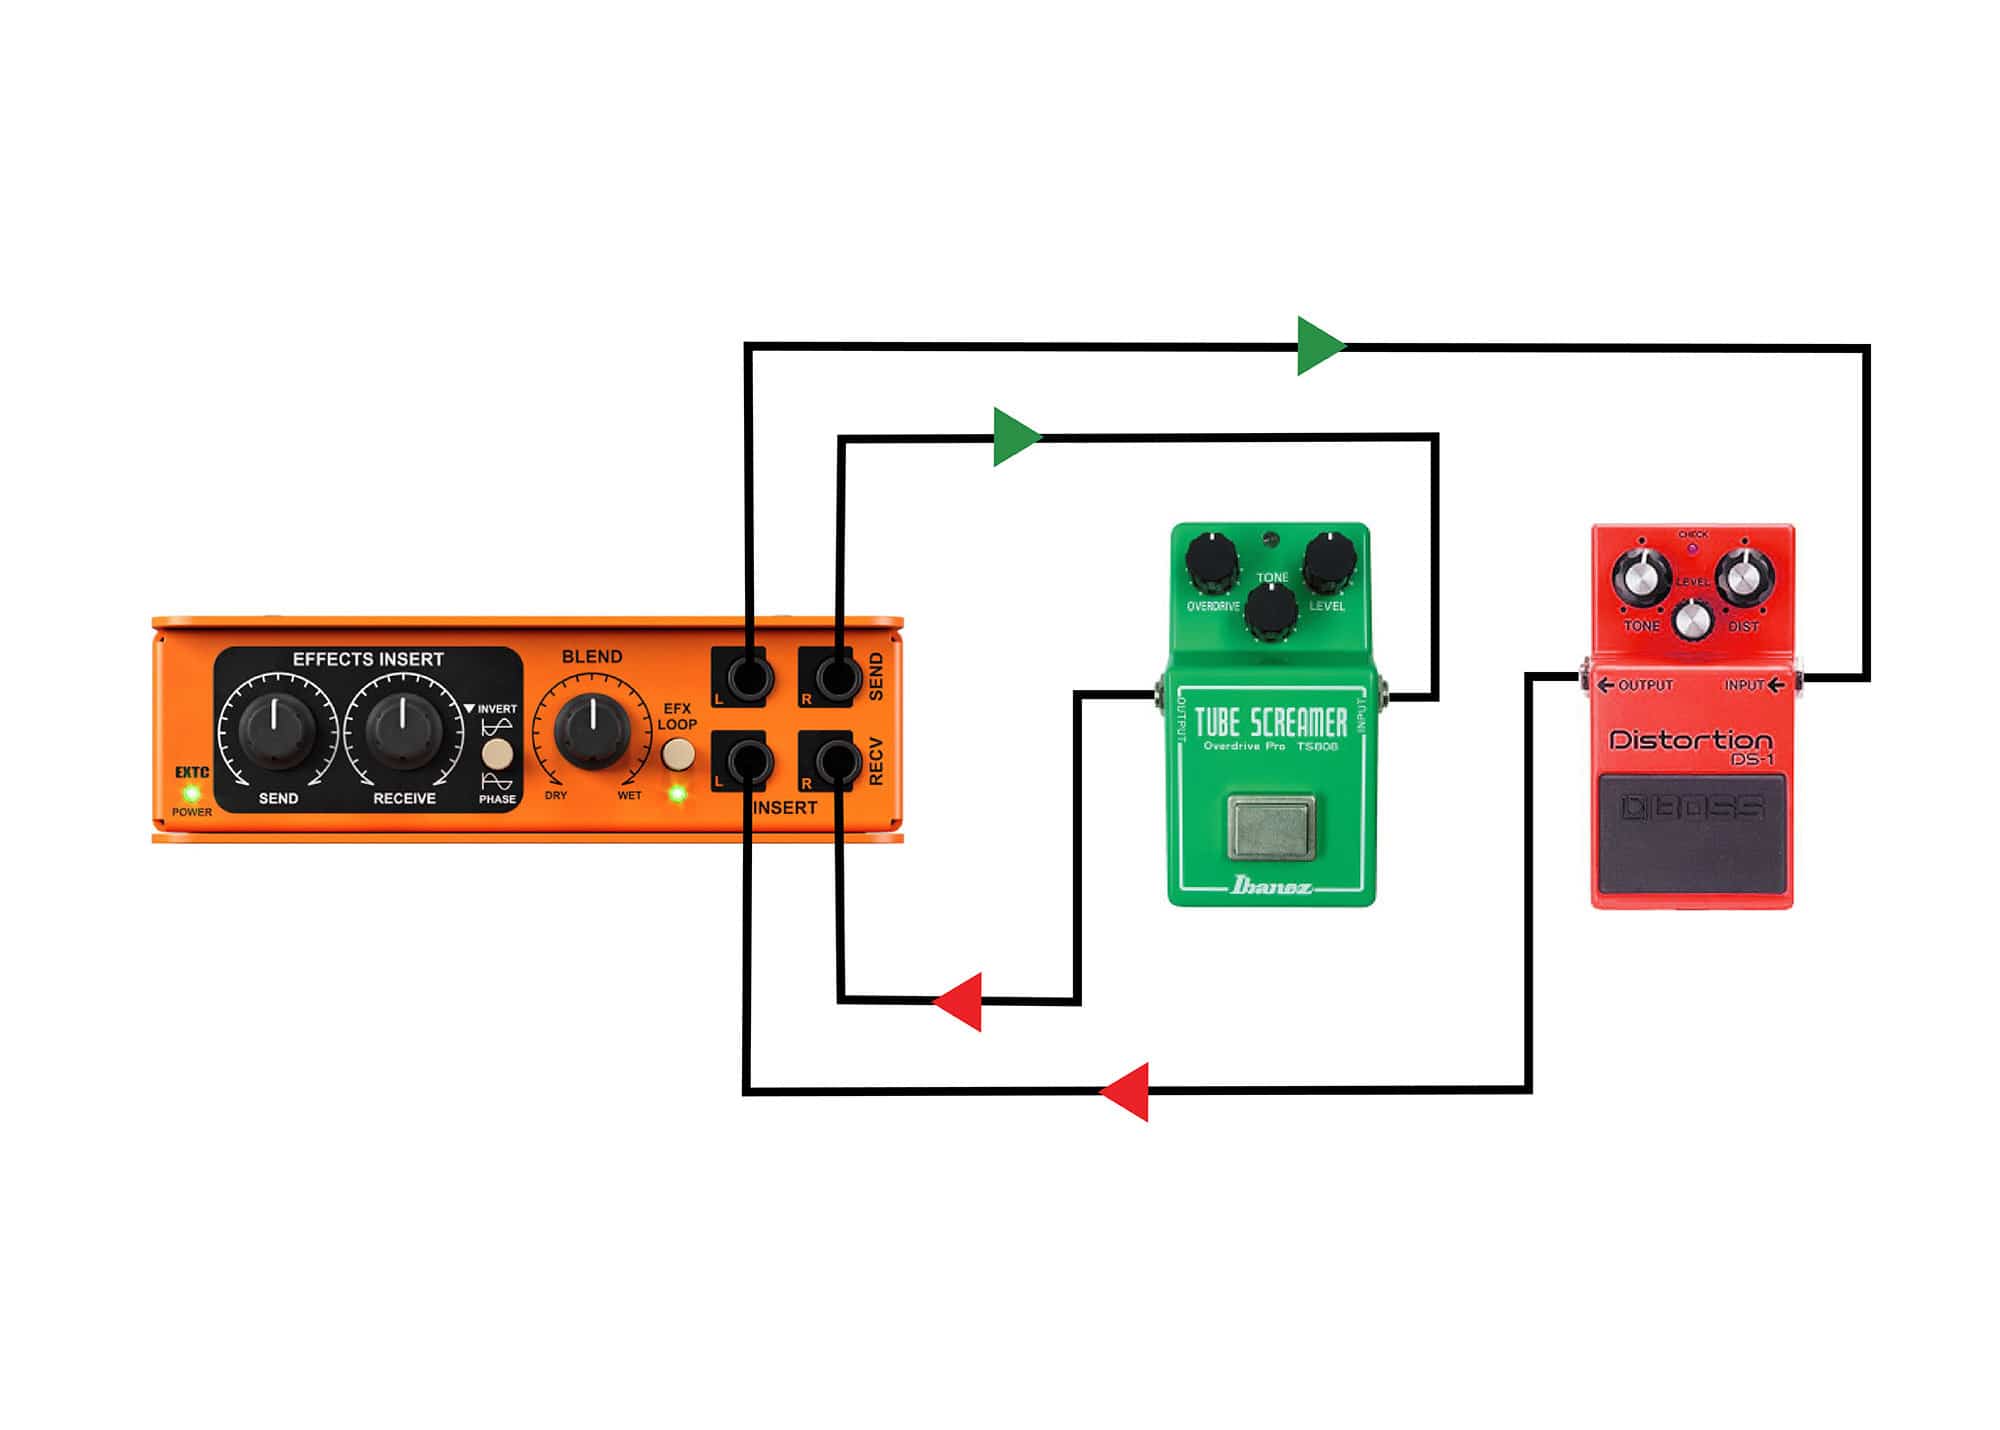 EXTC-Stereo: Connecting mono guitar pedals